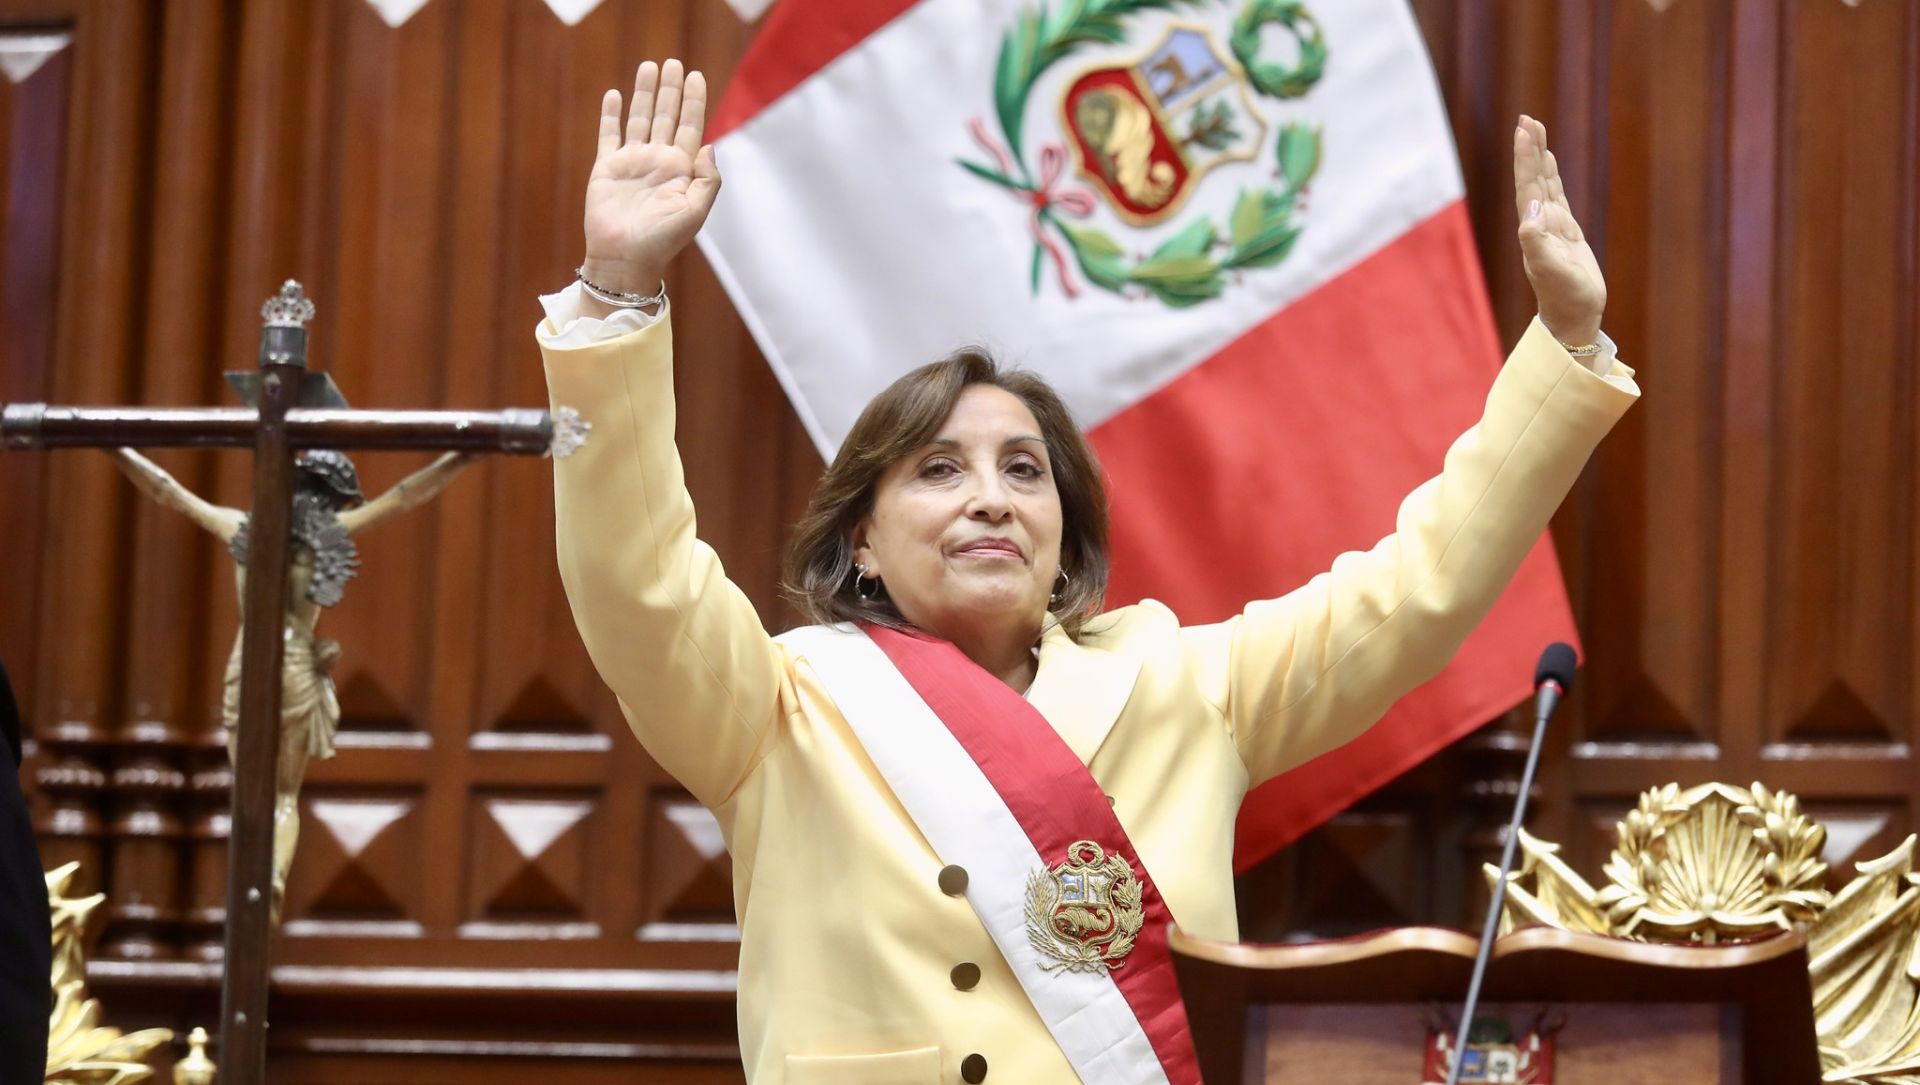 Dina Polorat is sworn in as President of Peru until 2026 after the dismissal of Pedro Castillo on charges of moral incompetence.